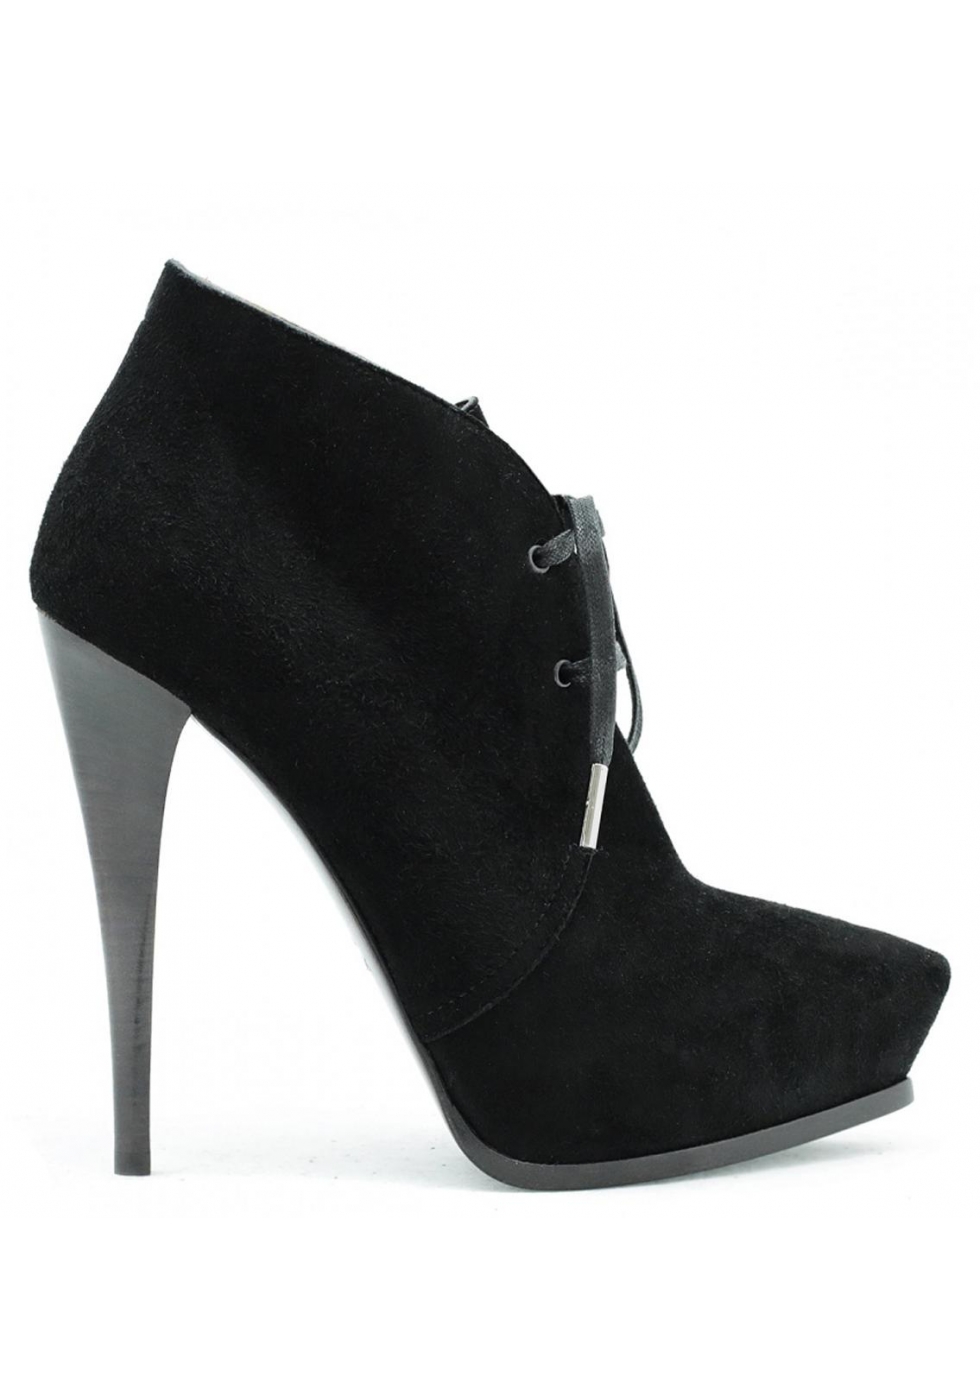 Lanvin high heels ankle boots in black kid leather - Italian Boutique